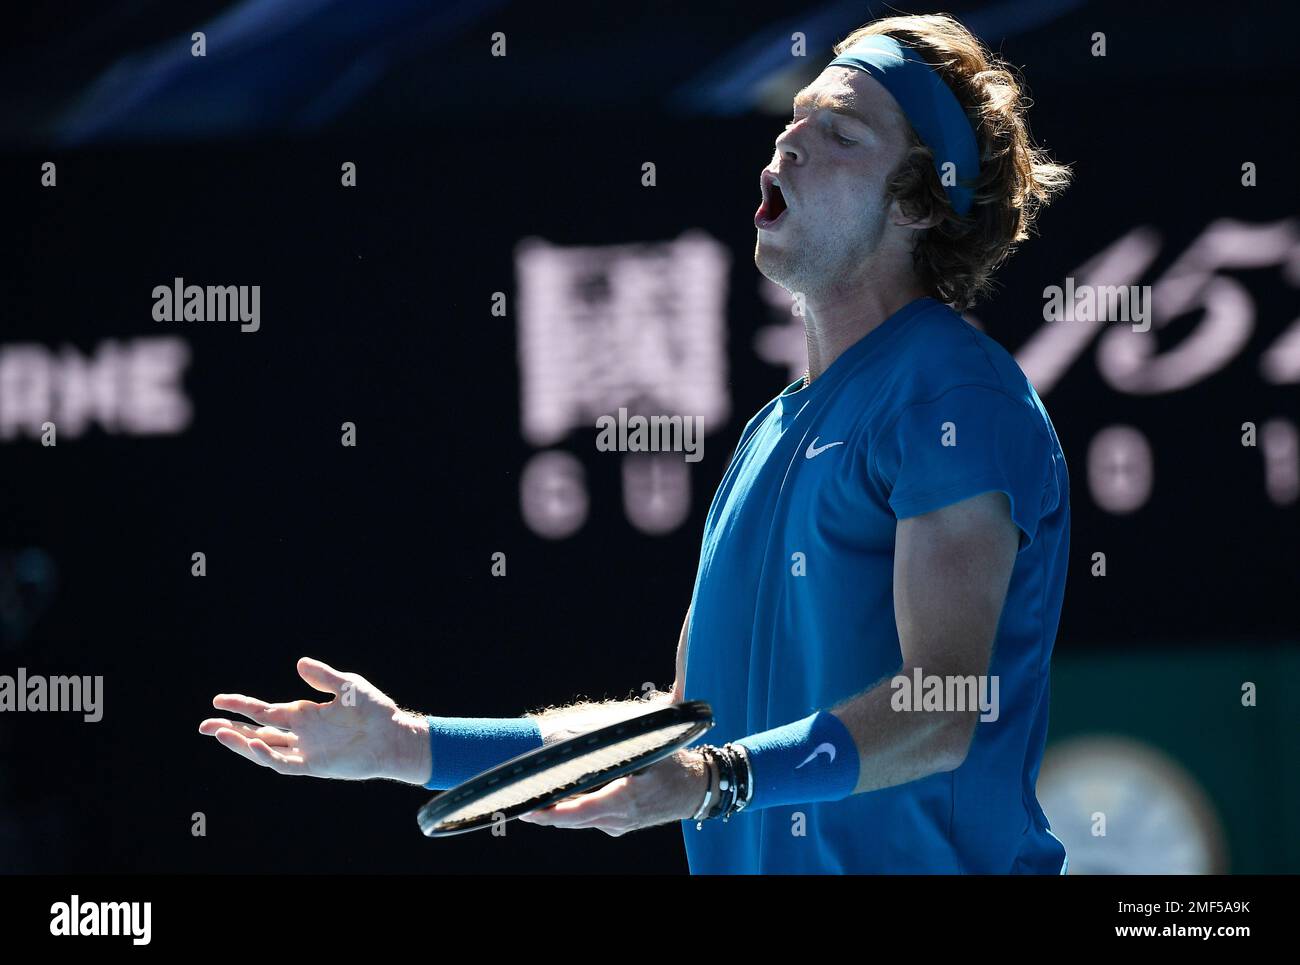 Russias Andrey Rublev reacts during his quarterfinal against compatriot Daniil Medvedev at the Australian Open tennis championship in Melbourne, Australia, Wednesday, Feb